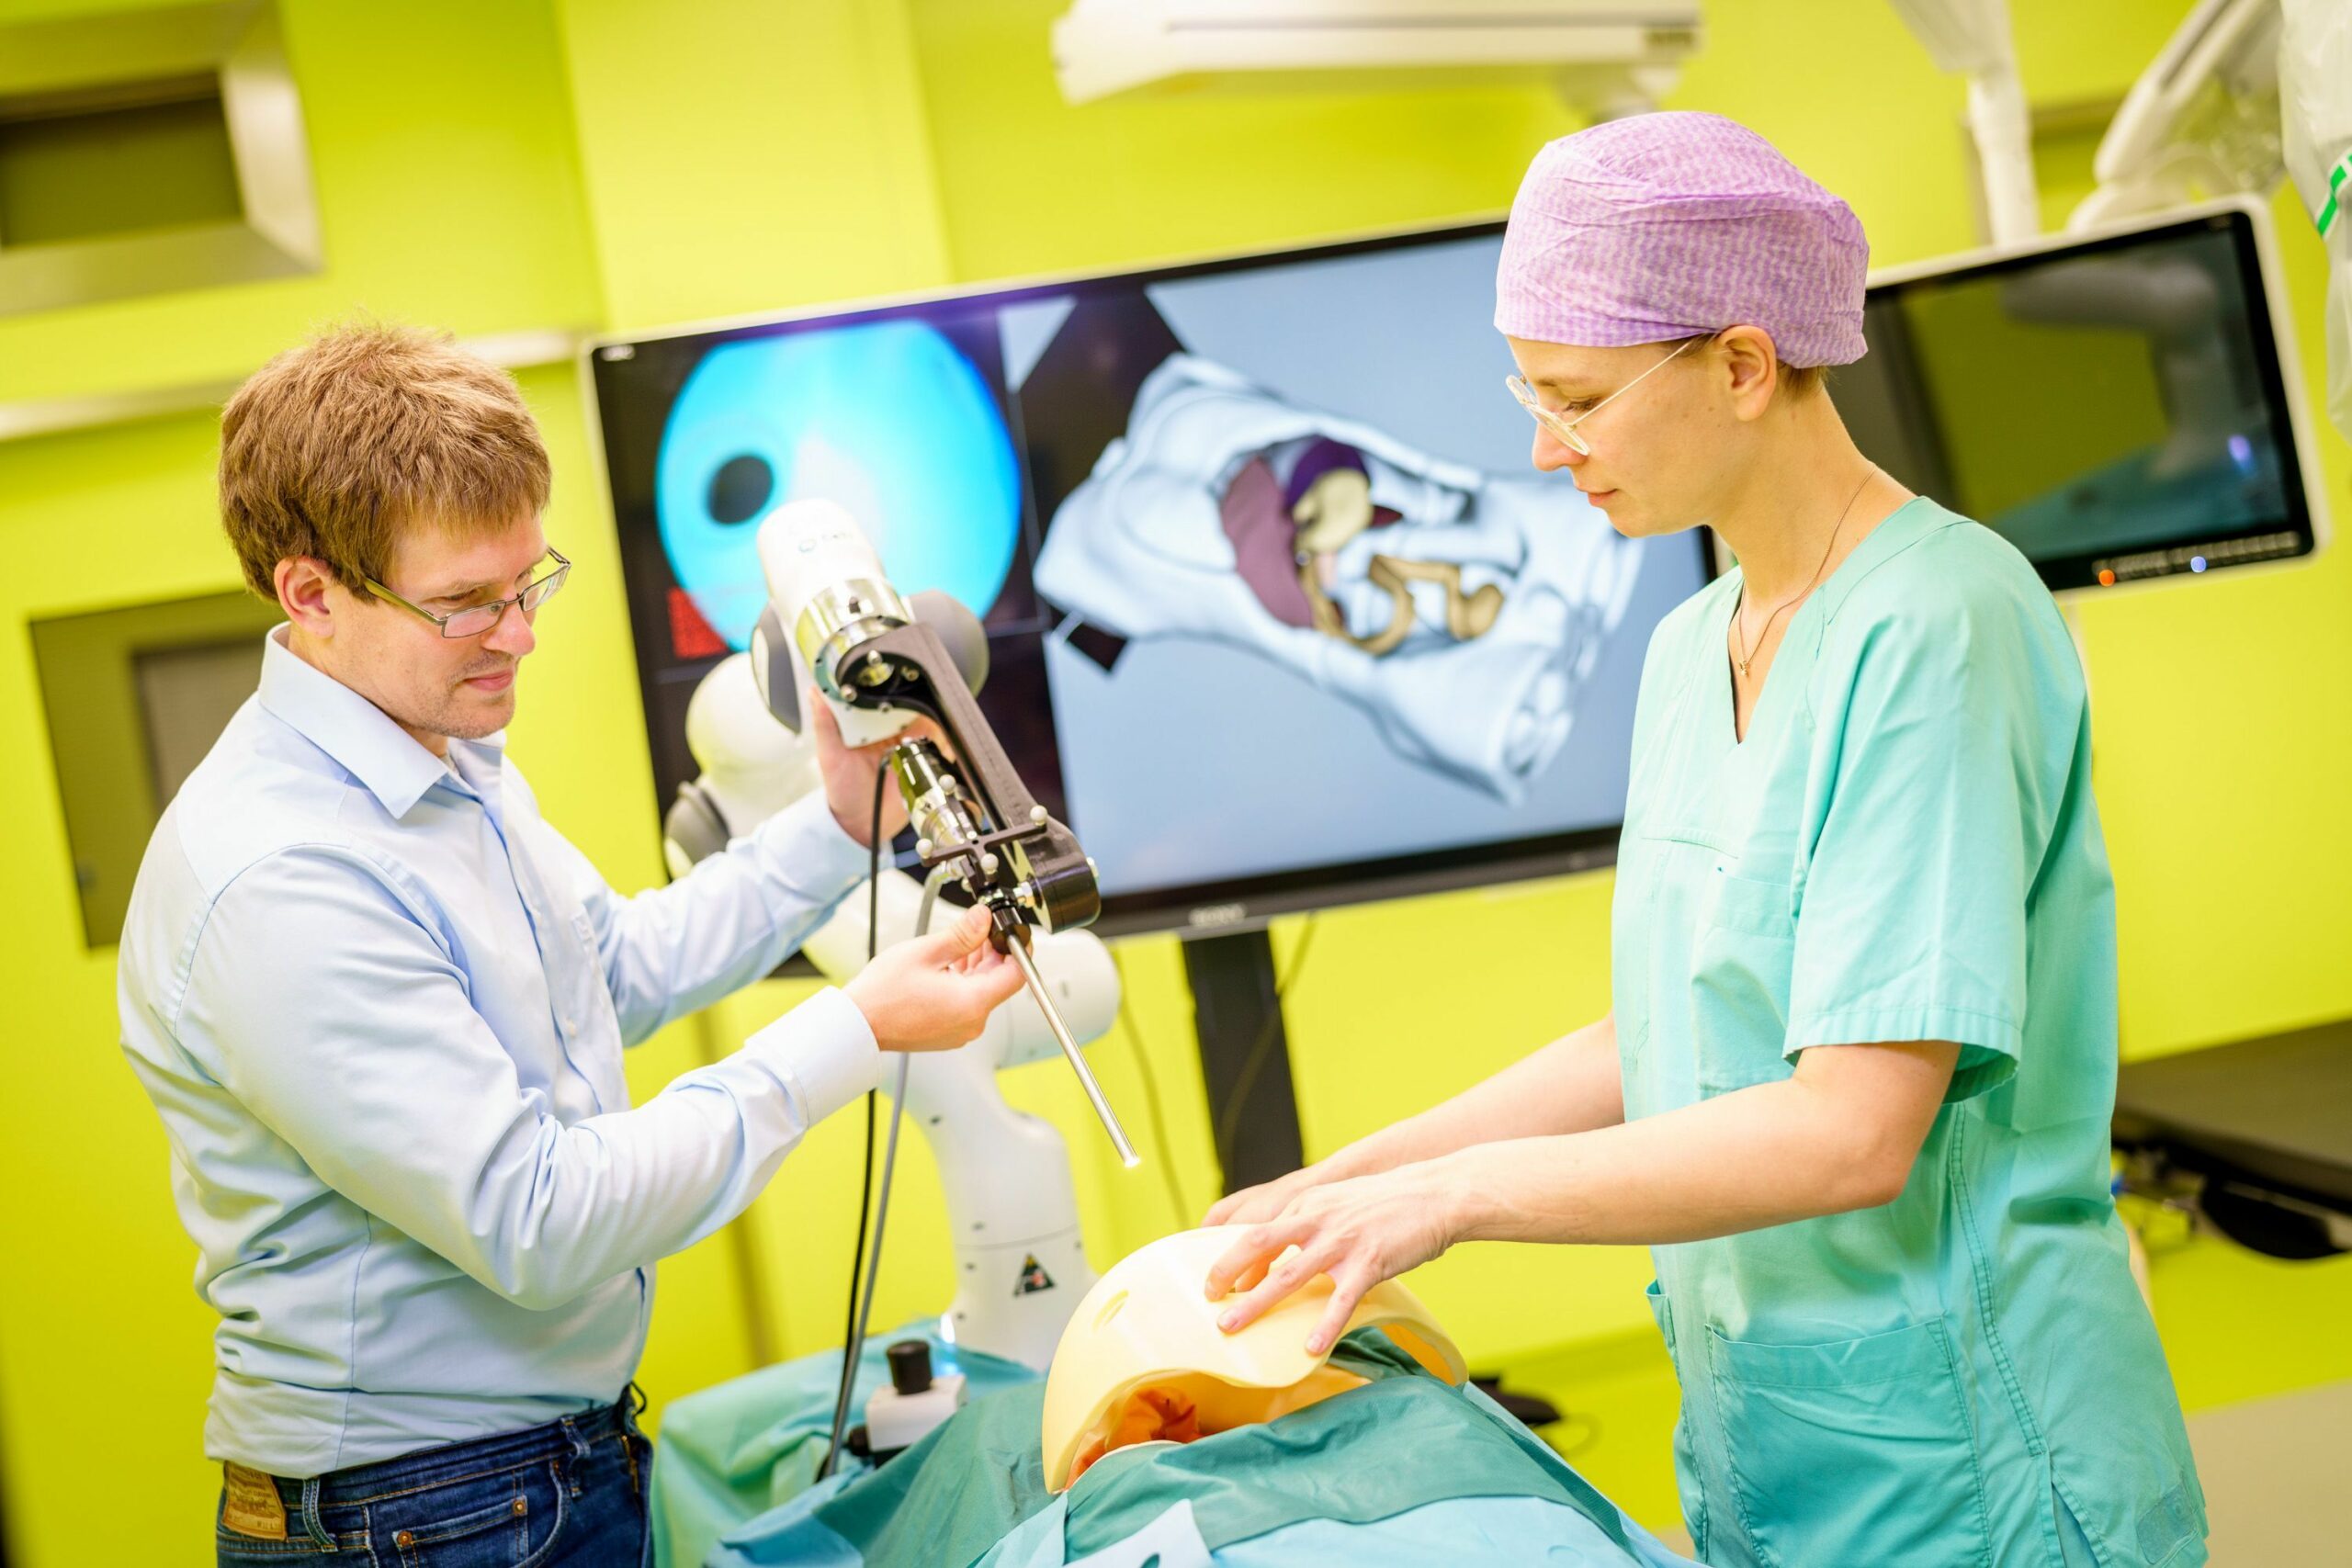 Photograph from the National Centre for Tumor Diseases Dresden showing the use of robotic assistance in medicine